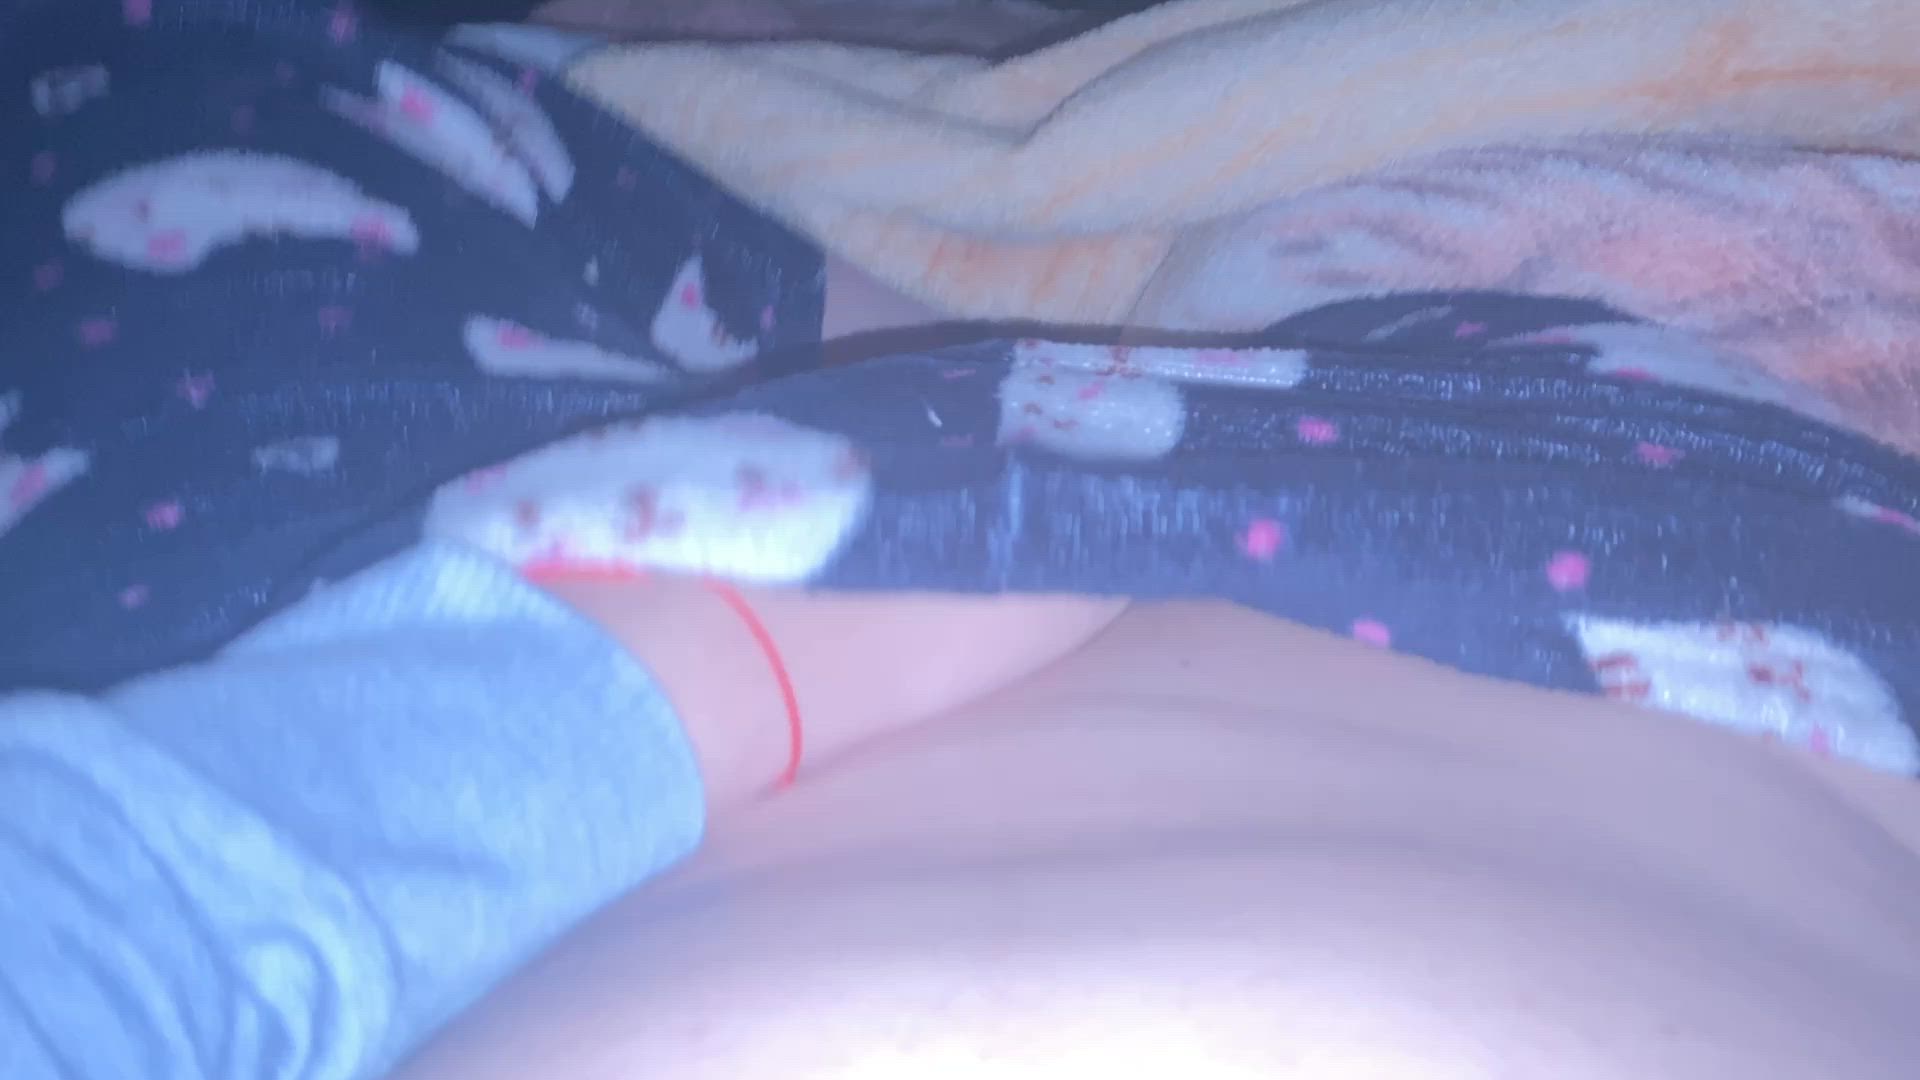 Amateur porn video with onlyfans model andreac2609 <strong>@andreac2609</strong>